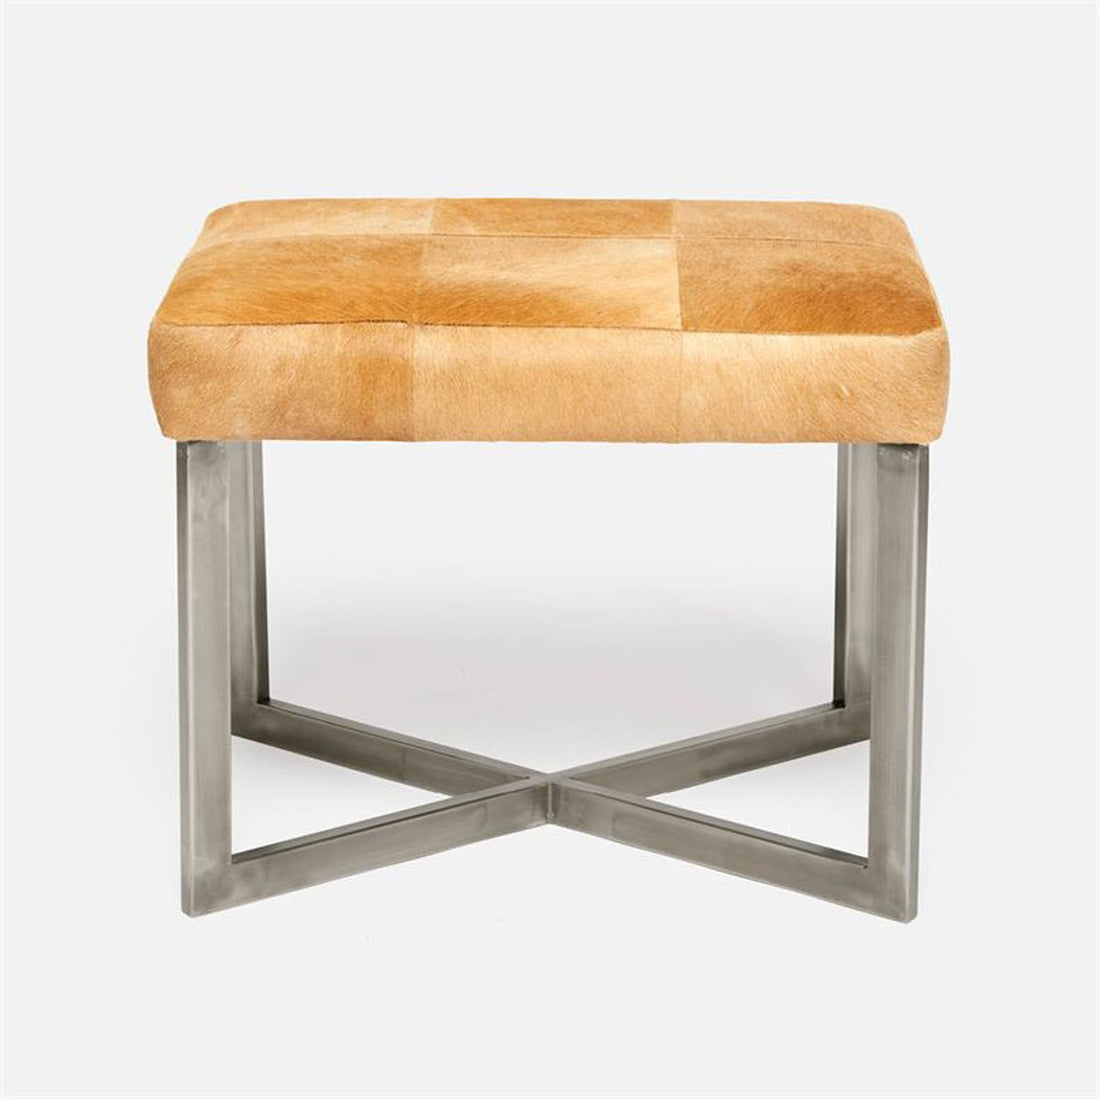 Made Goods Roger Cowhide Single Bench in Hair-On-Hide